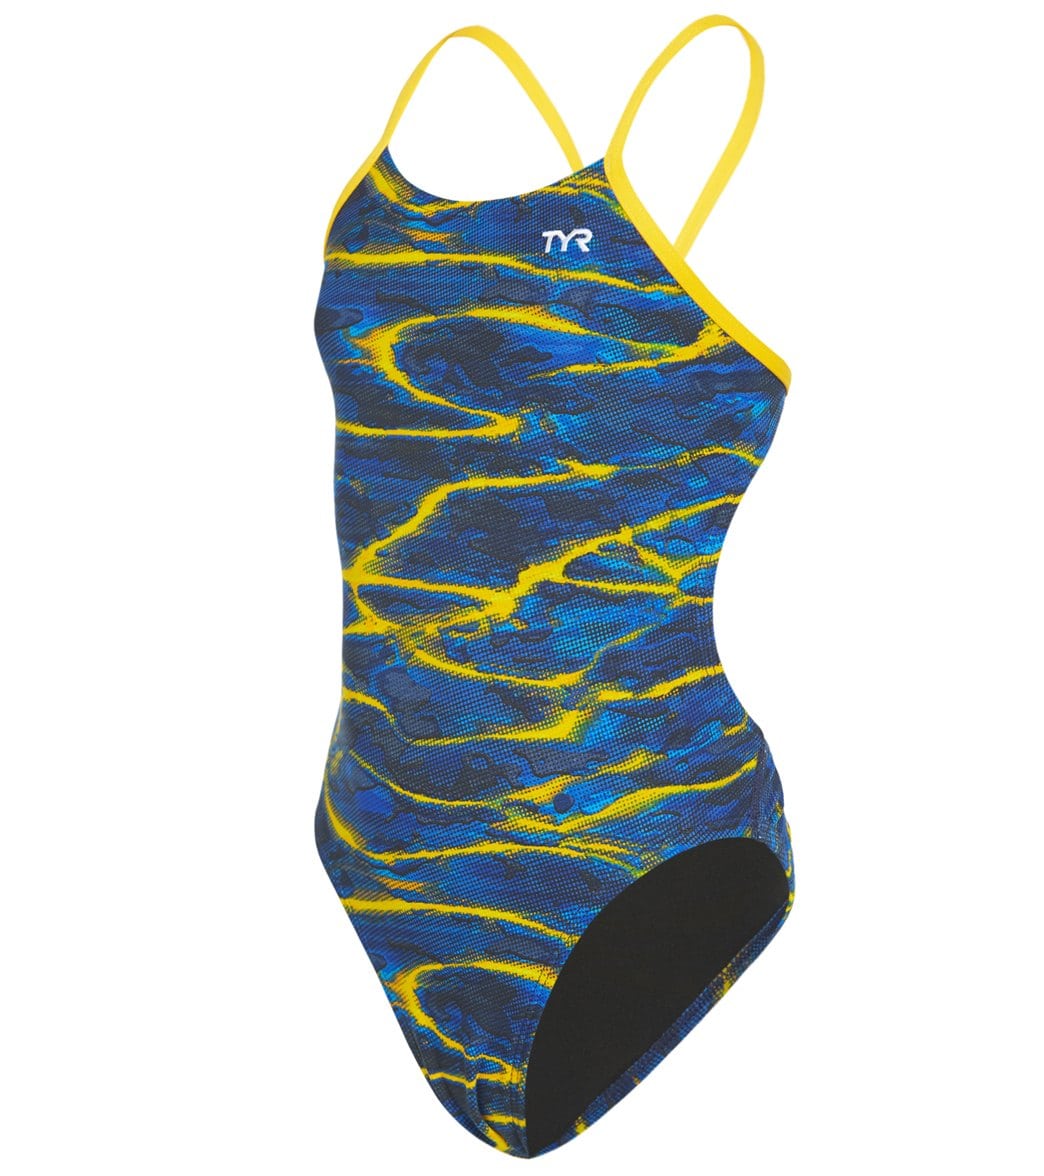 TYR Girls' Lambent Cutoutfit One Piece Swimsuit - Navy/Gold 22 Polyester/Spandex - Swimoutlet.com